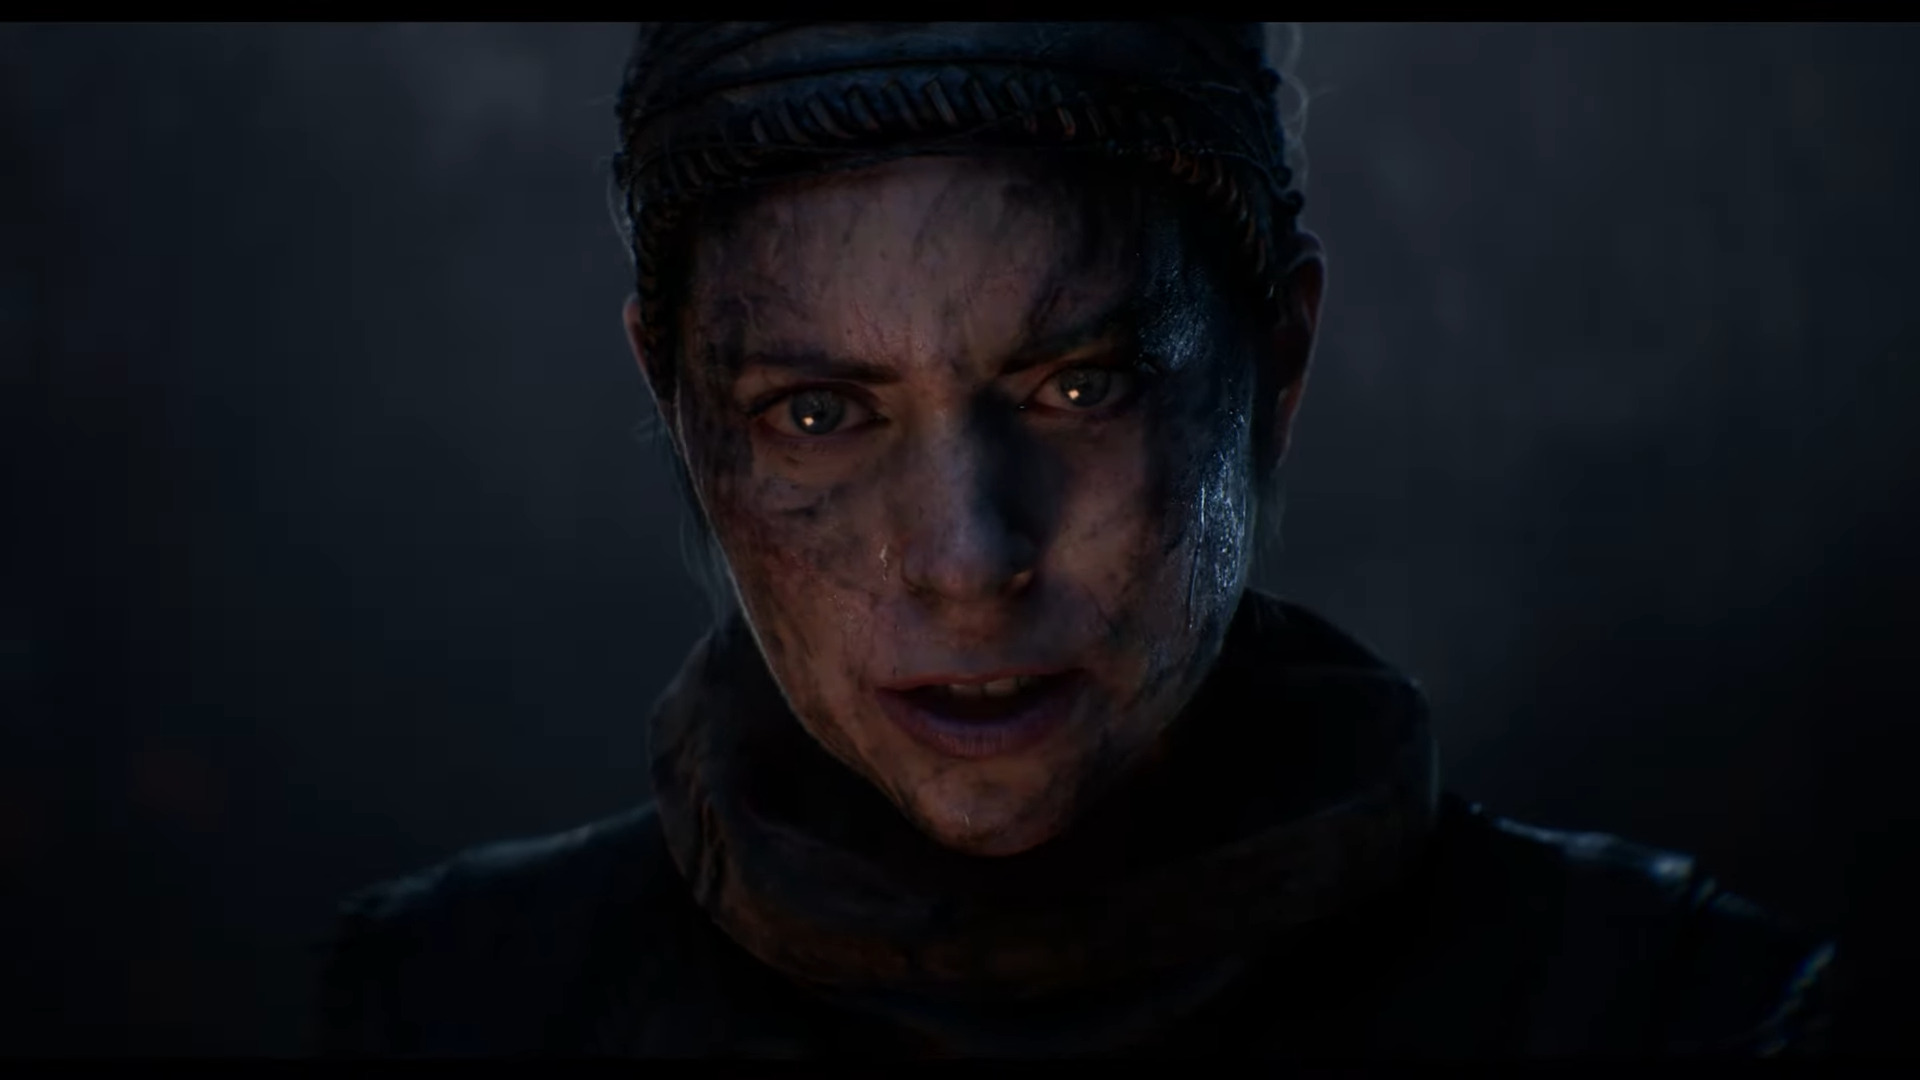 Hellblade 2 Developer Diary Goes Behind the Scenes With Motion Capture